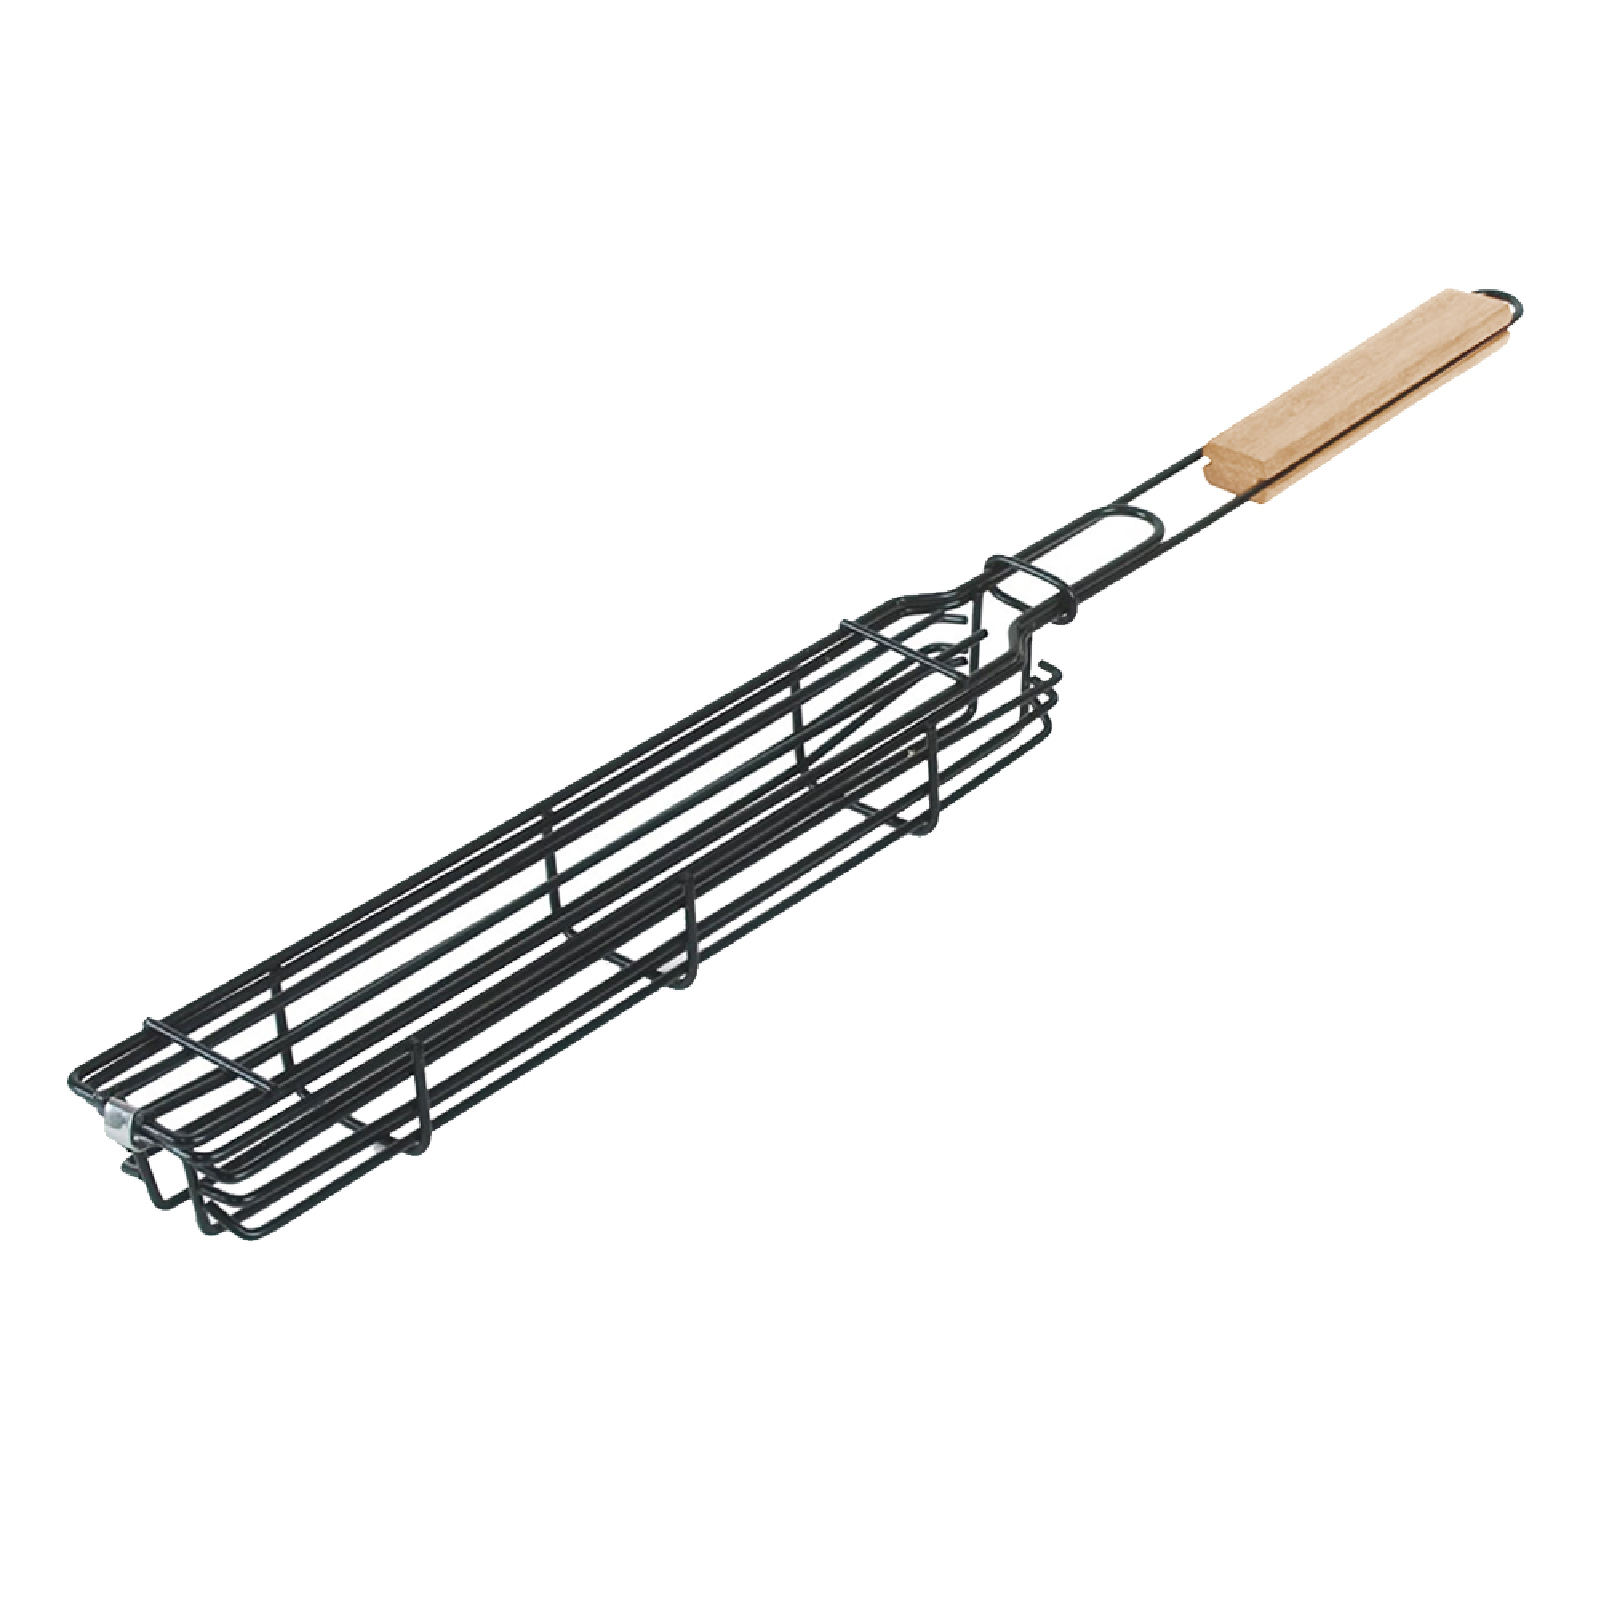 Cheers.US Grilling Basket, BBQ Grill Accessories Kabob Grilling Baskets tainless Steel Smoker Tube Grills, BBQ Smoker Rotisserie Basket for Grilling Vegetables - image 2 of 6